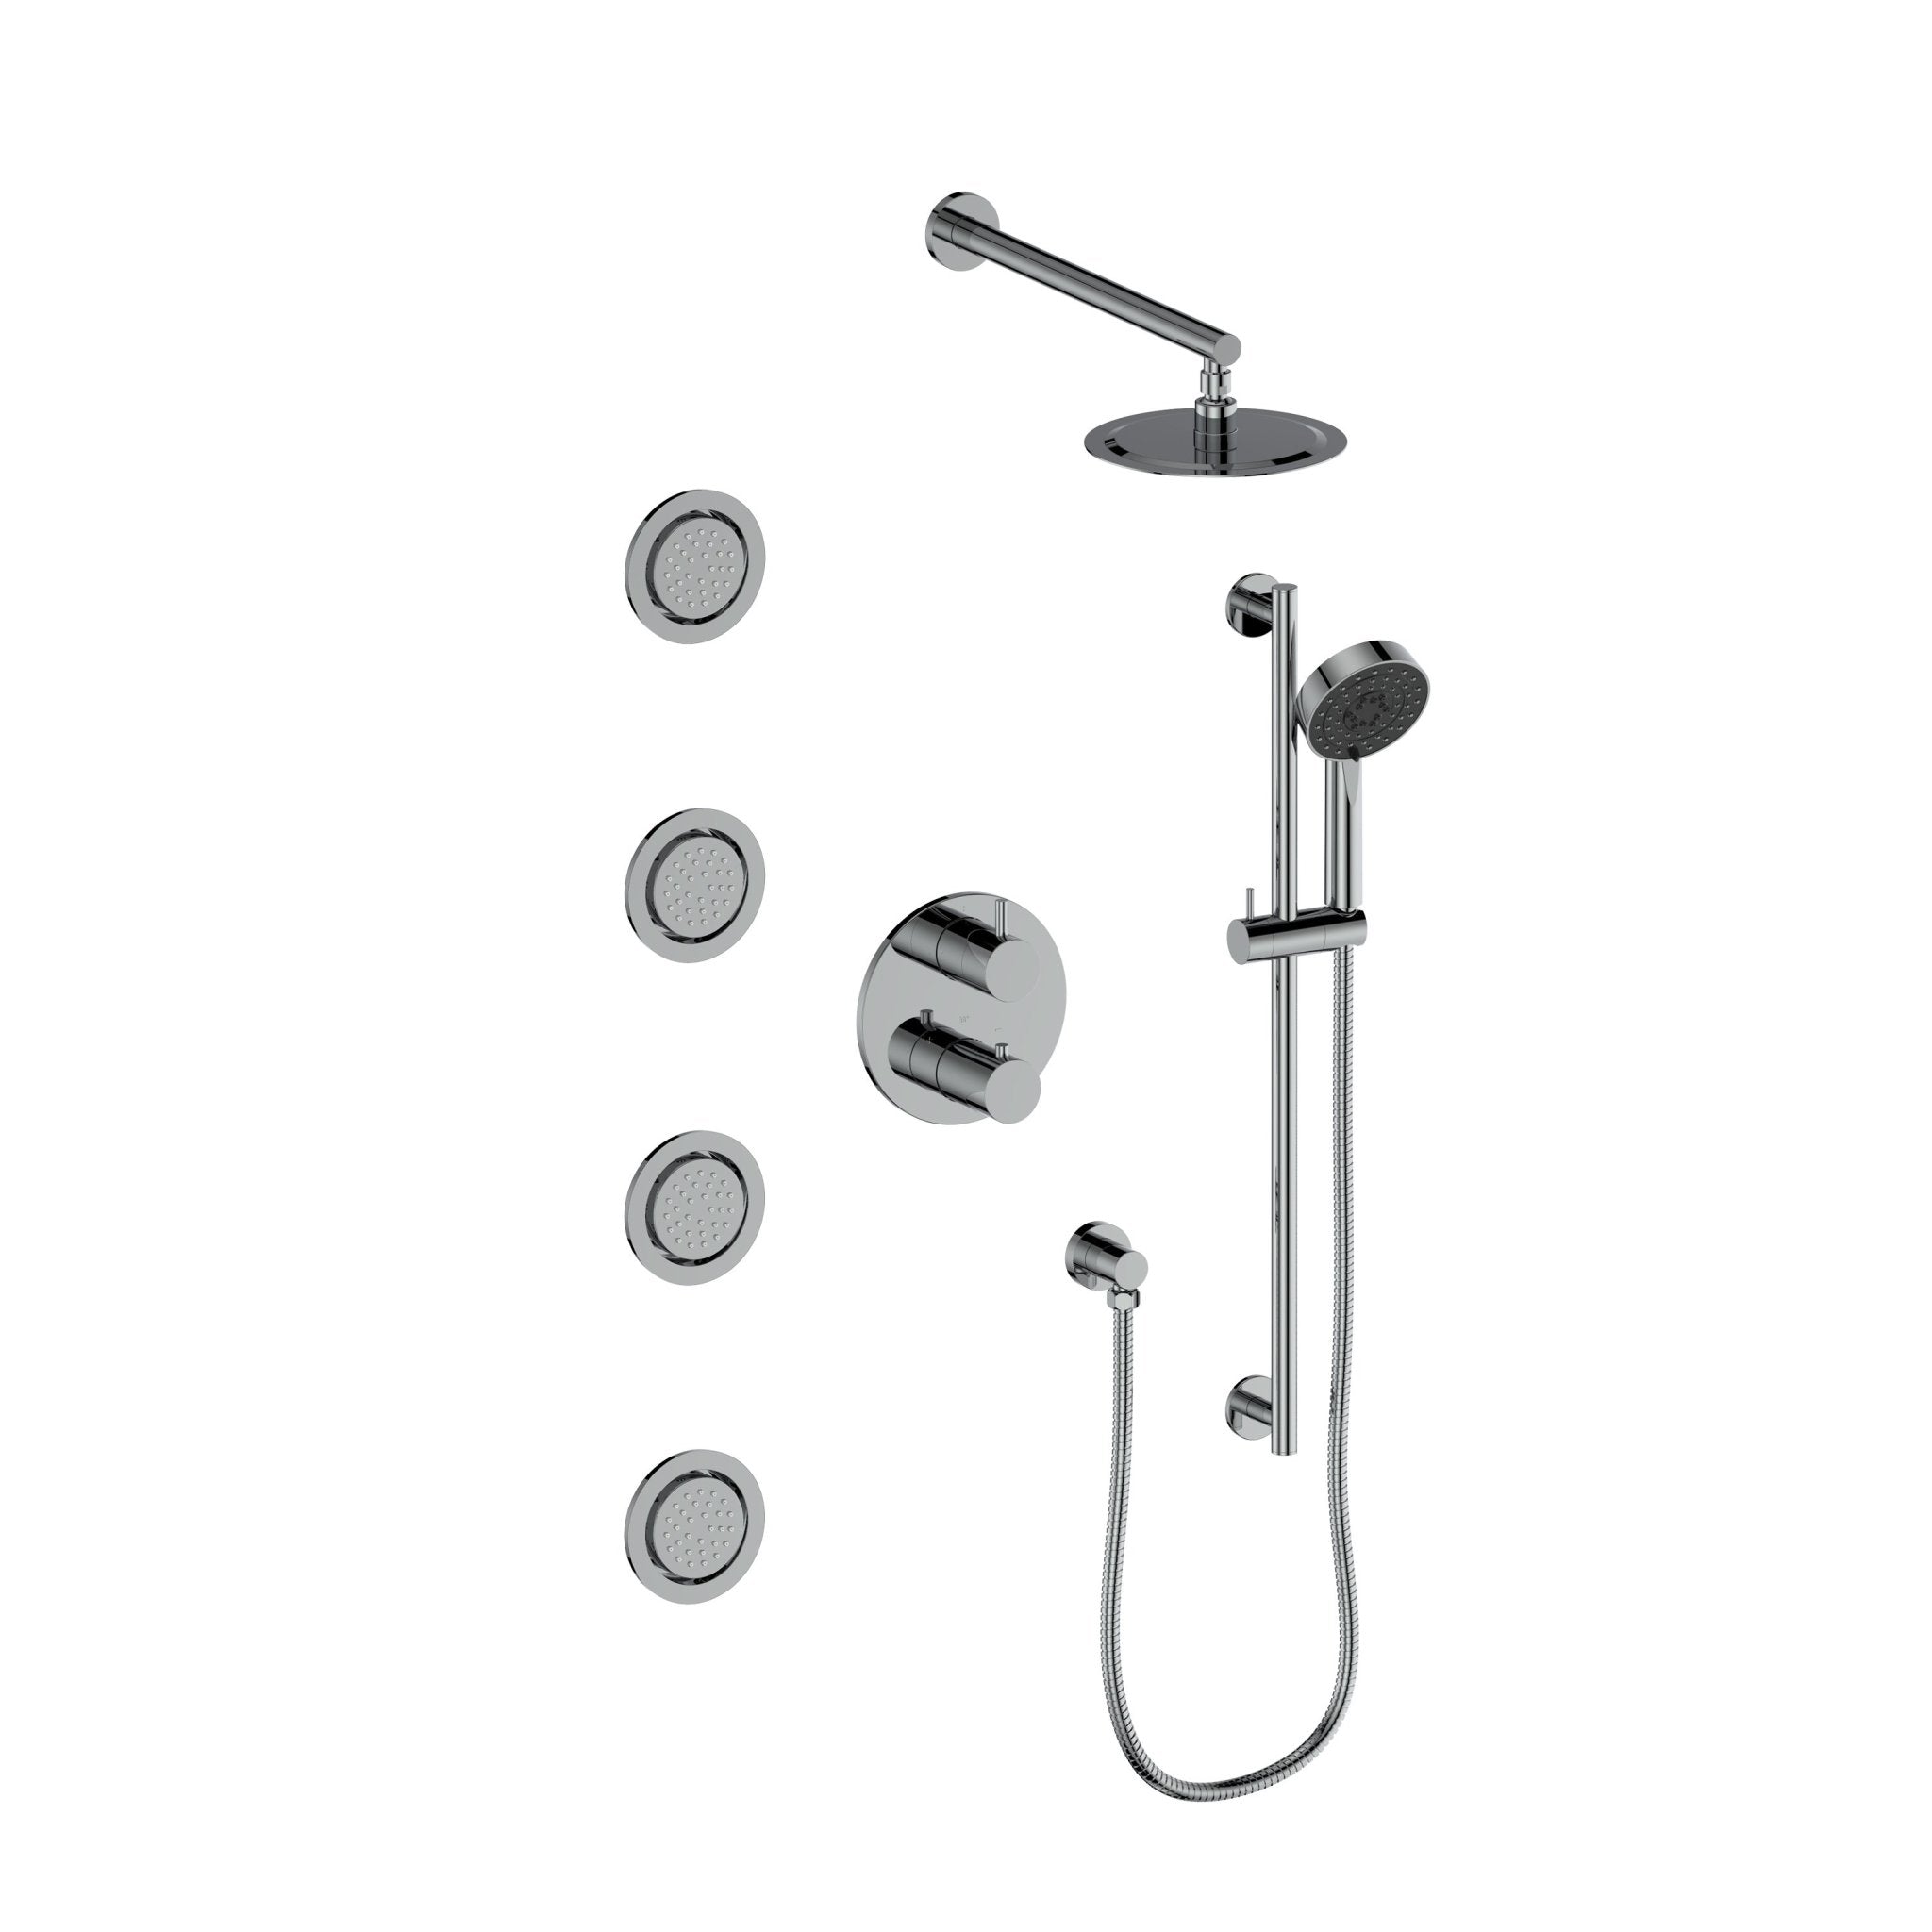 ZLINE Emerald Bay Thermostatic Shower System with Body Jets (EMBY-SHS-T3) in chrome